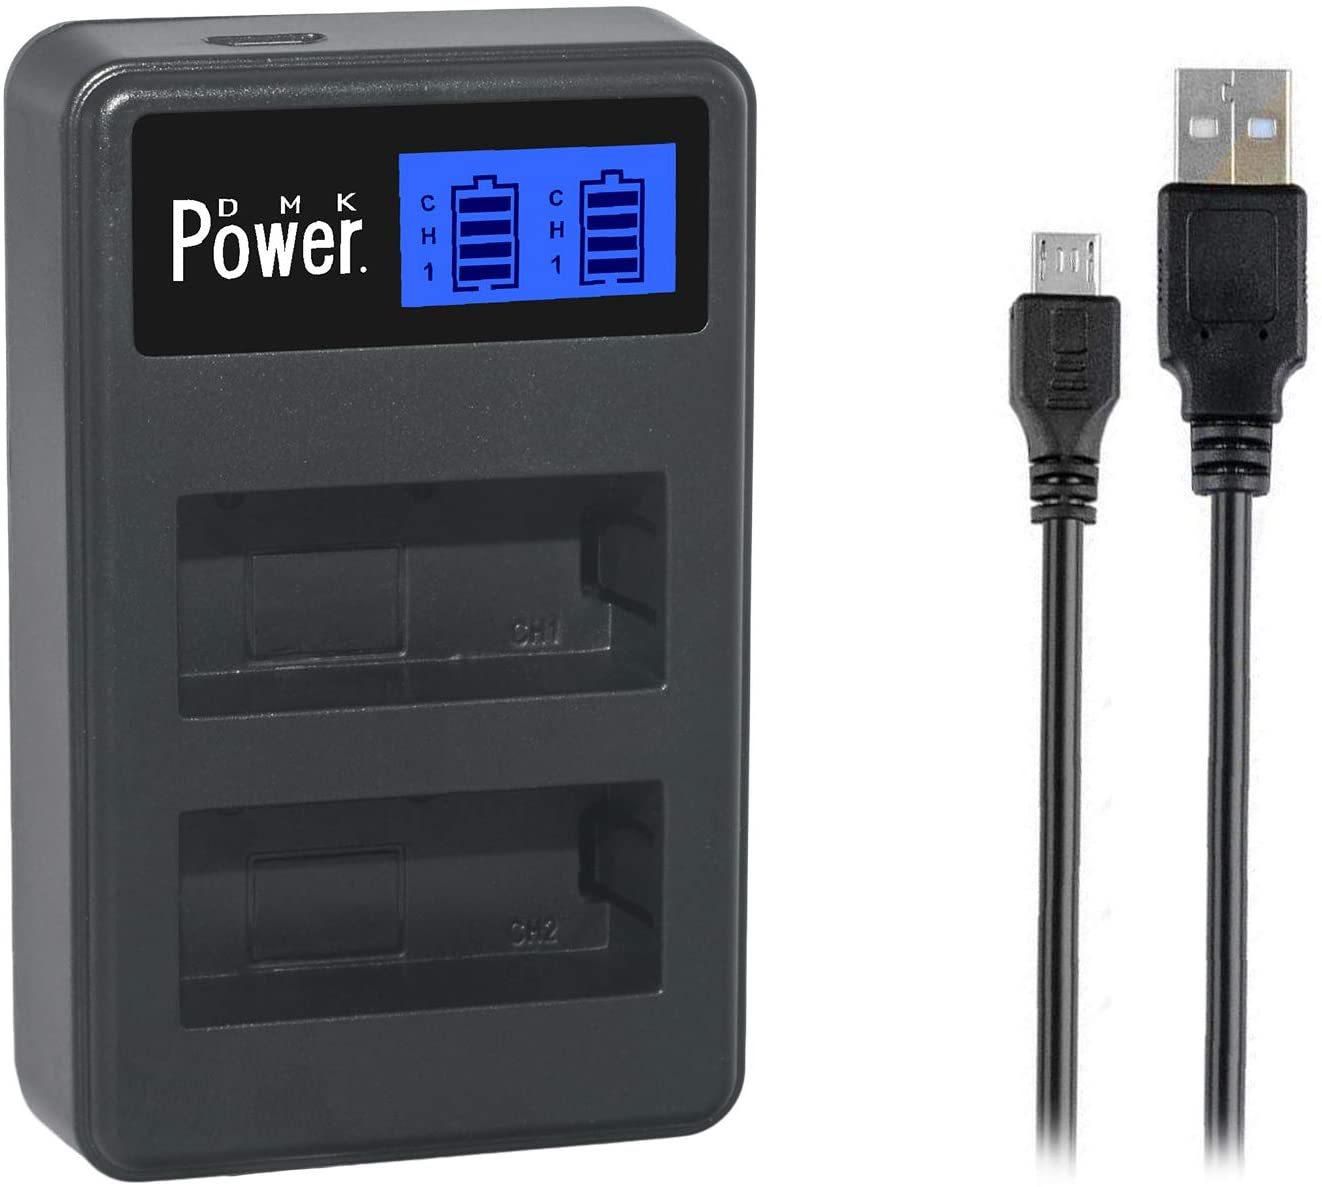 DMK Power FW-50 Battery LCD Dual USB Charger for SONY A7II A7R A7S,Alpha A6300 A6000 A5000 .NEX 5T